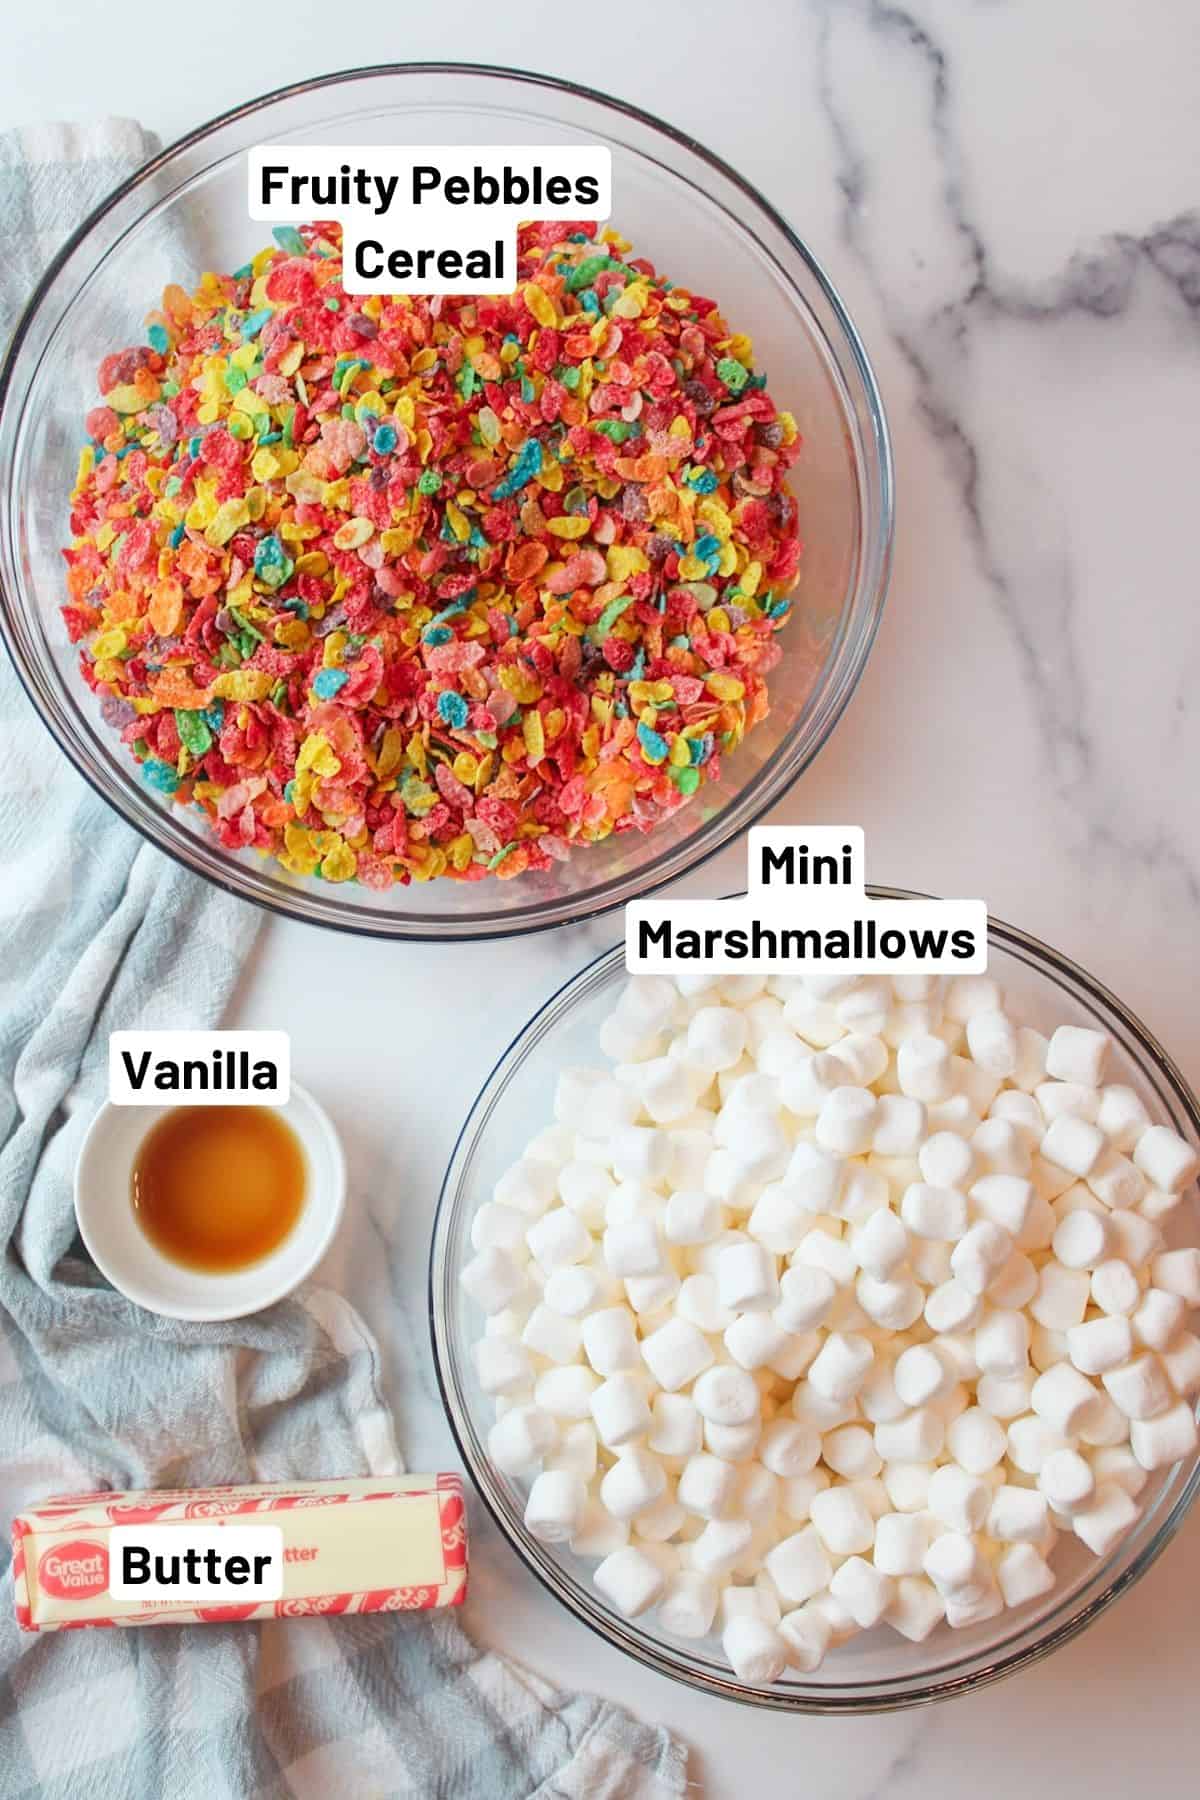 labled ingredients needed to make fruity pebbles treats